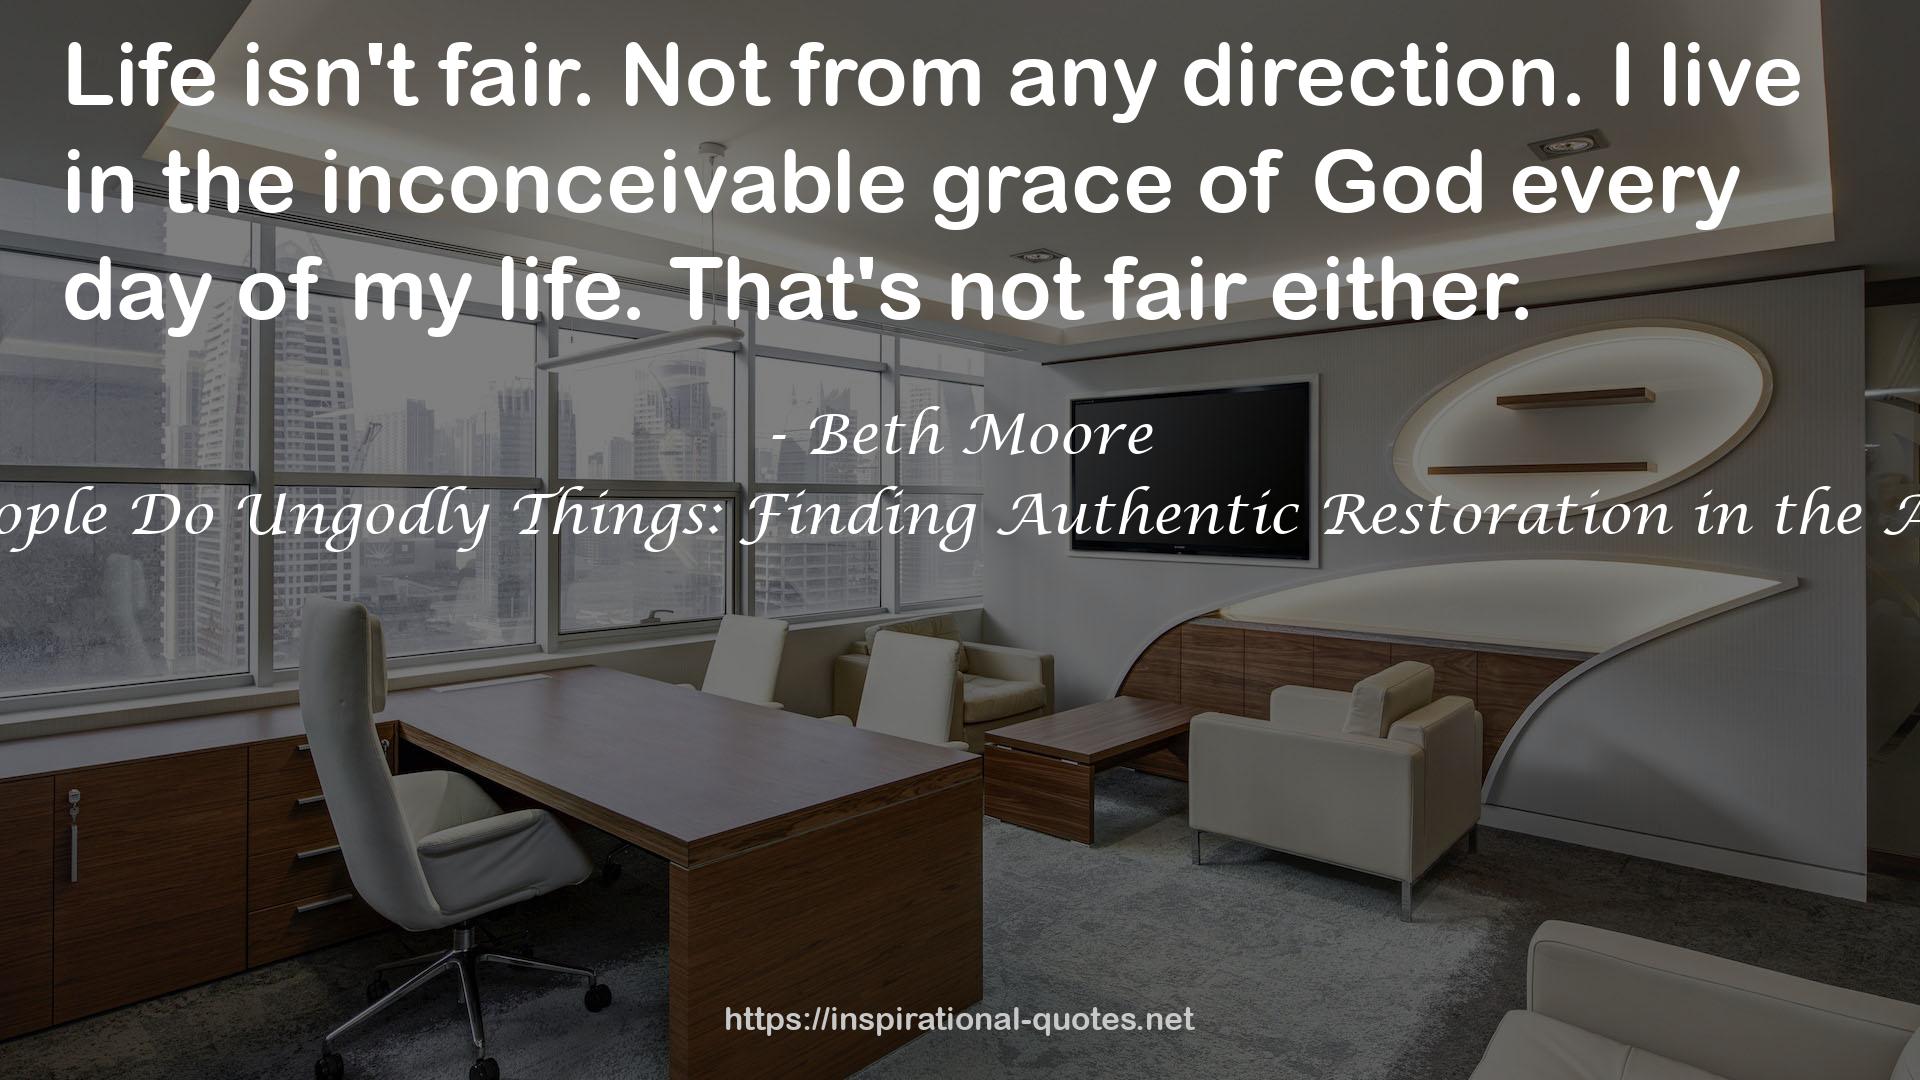 When Godly People Do Ungodly Things: Finding Authentic Restoration in the Age of Seduction QUOTES